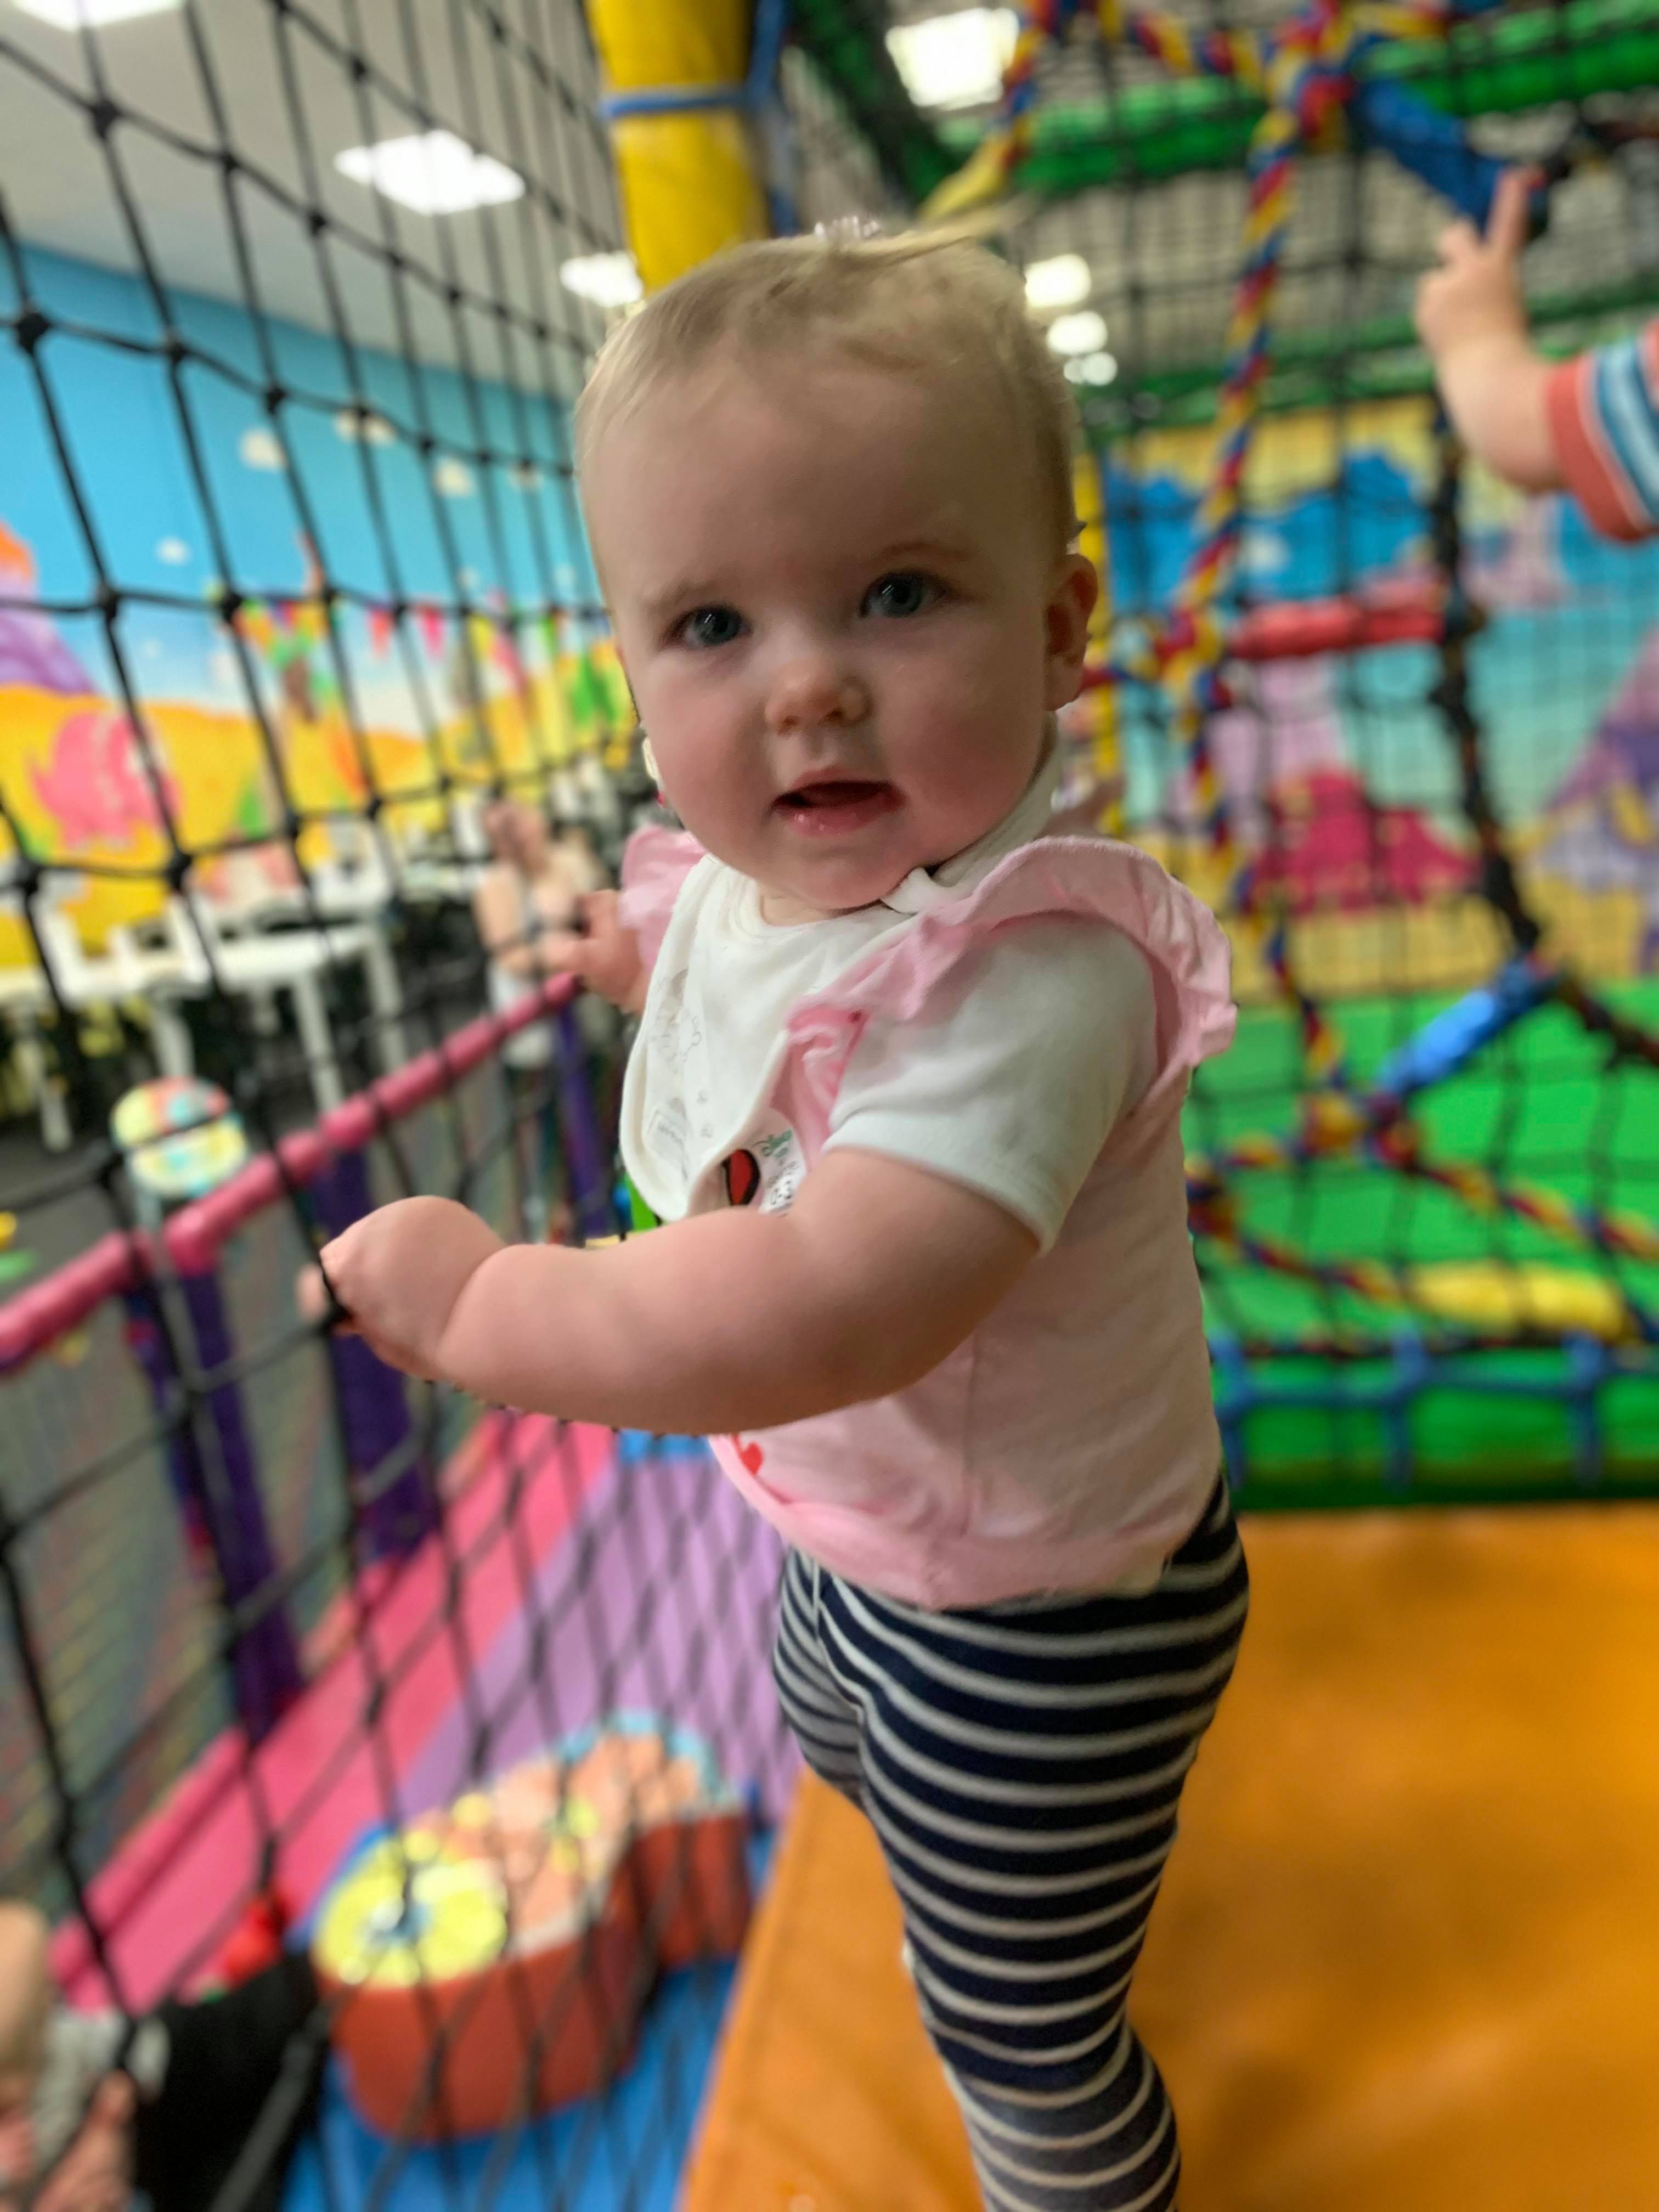 MHL - Child at soft play